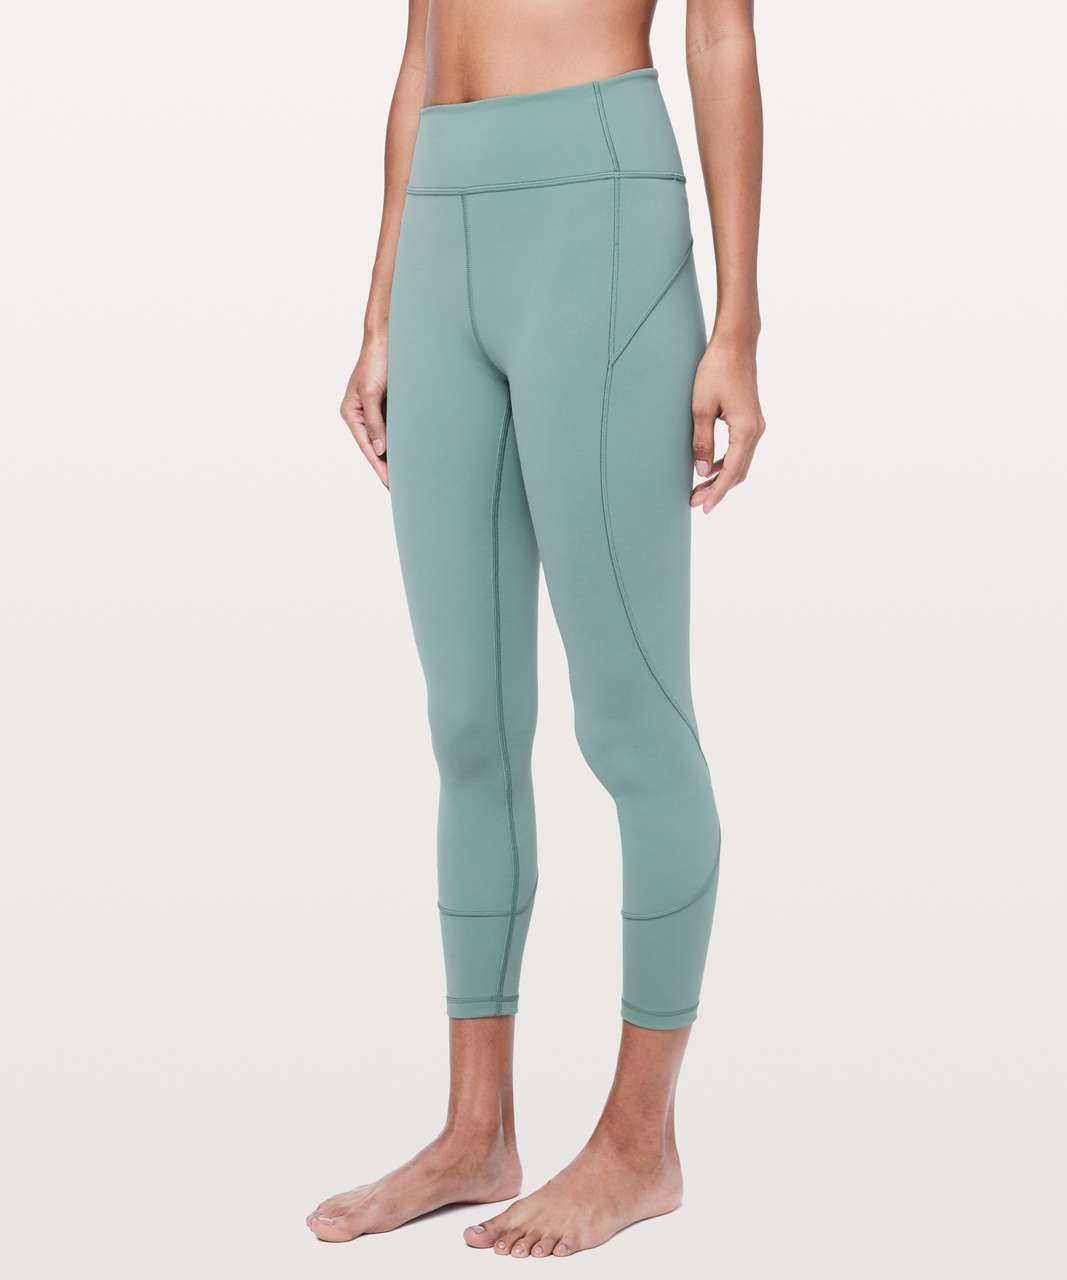 Lululemon In Movement 7/8 Tight *Everlux 25" - Frosted Pine